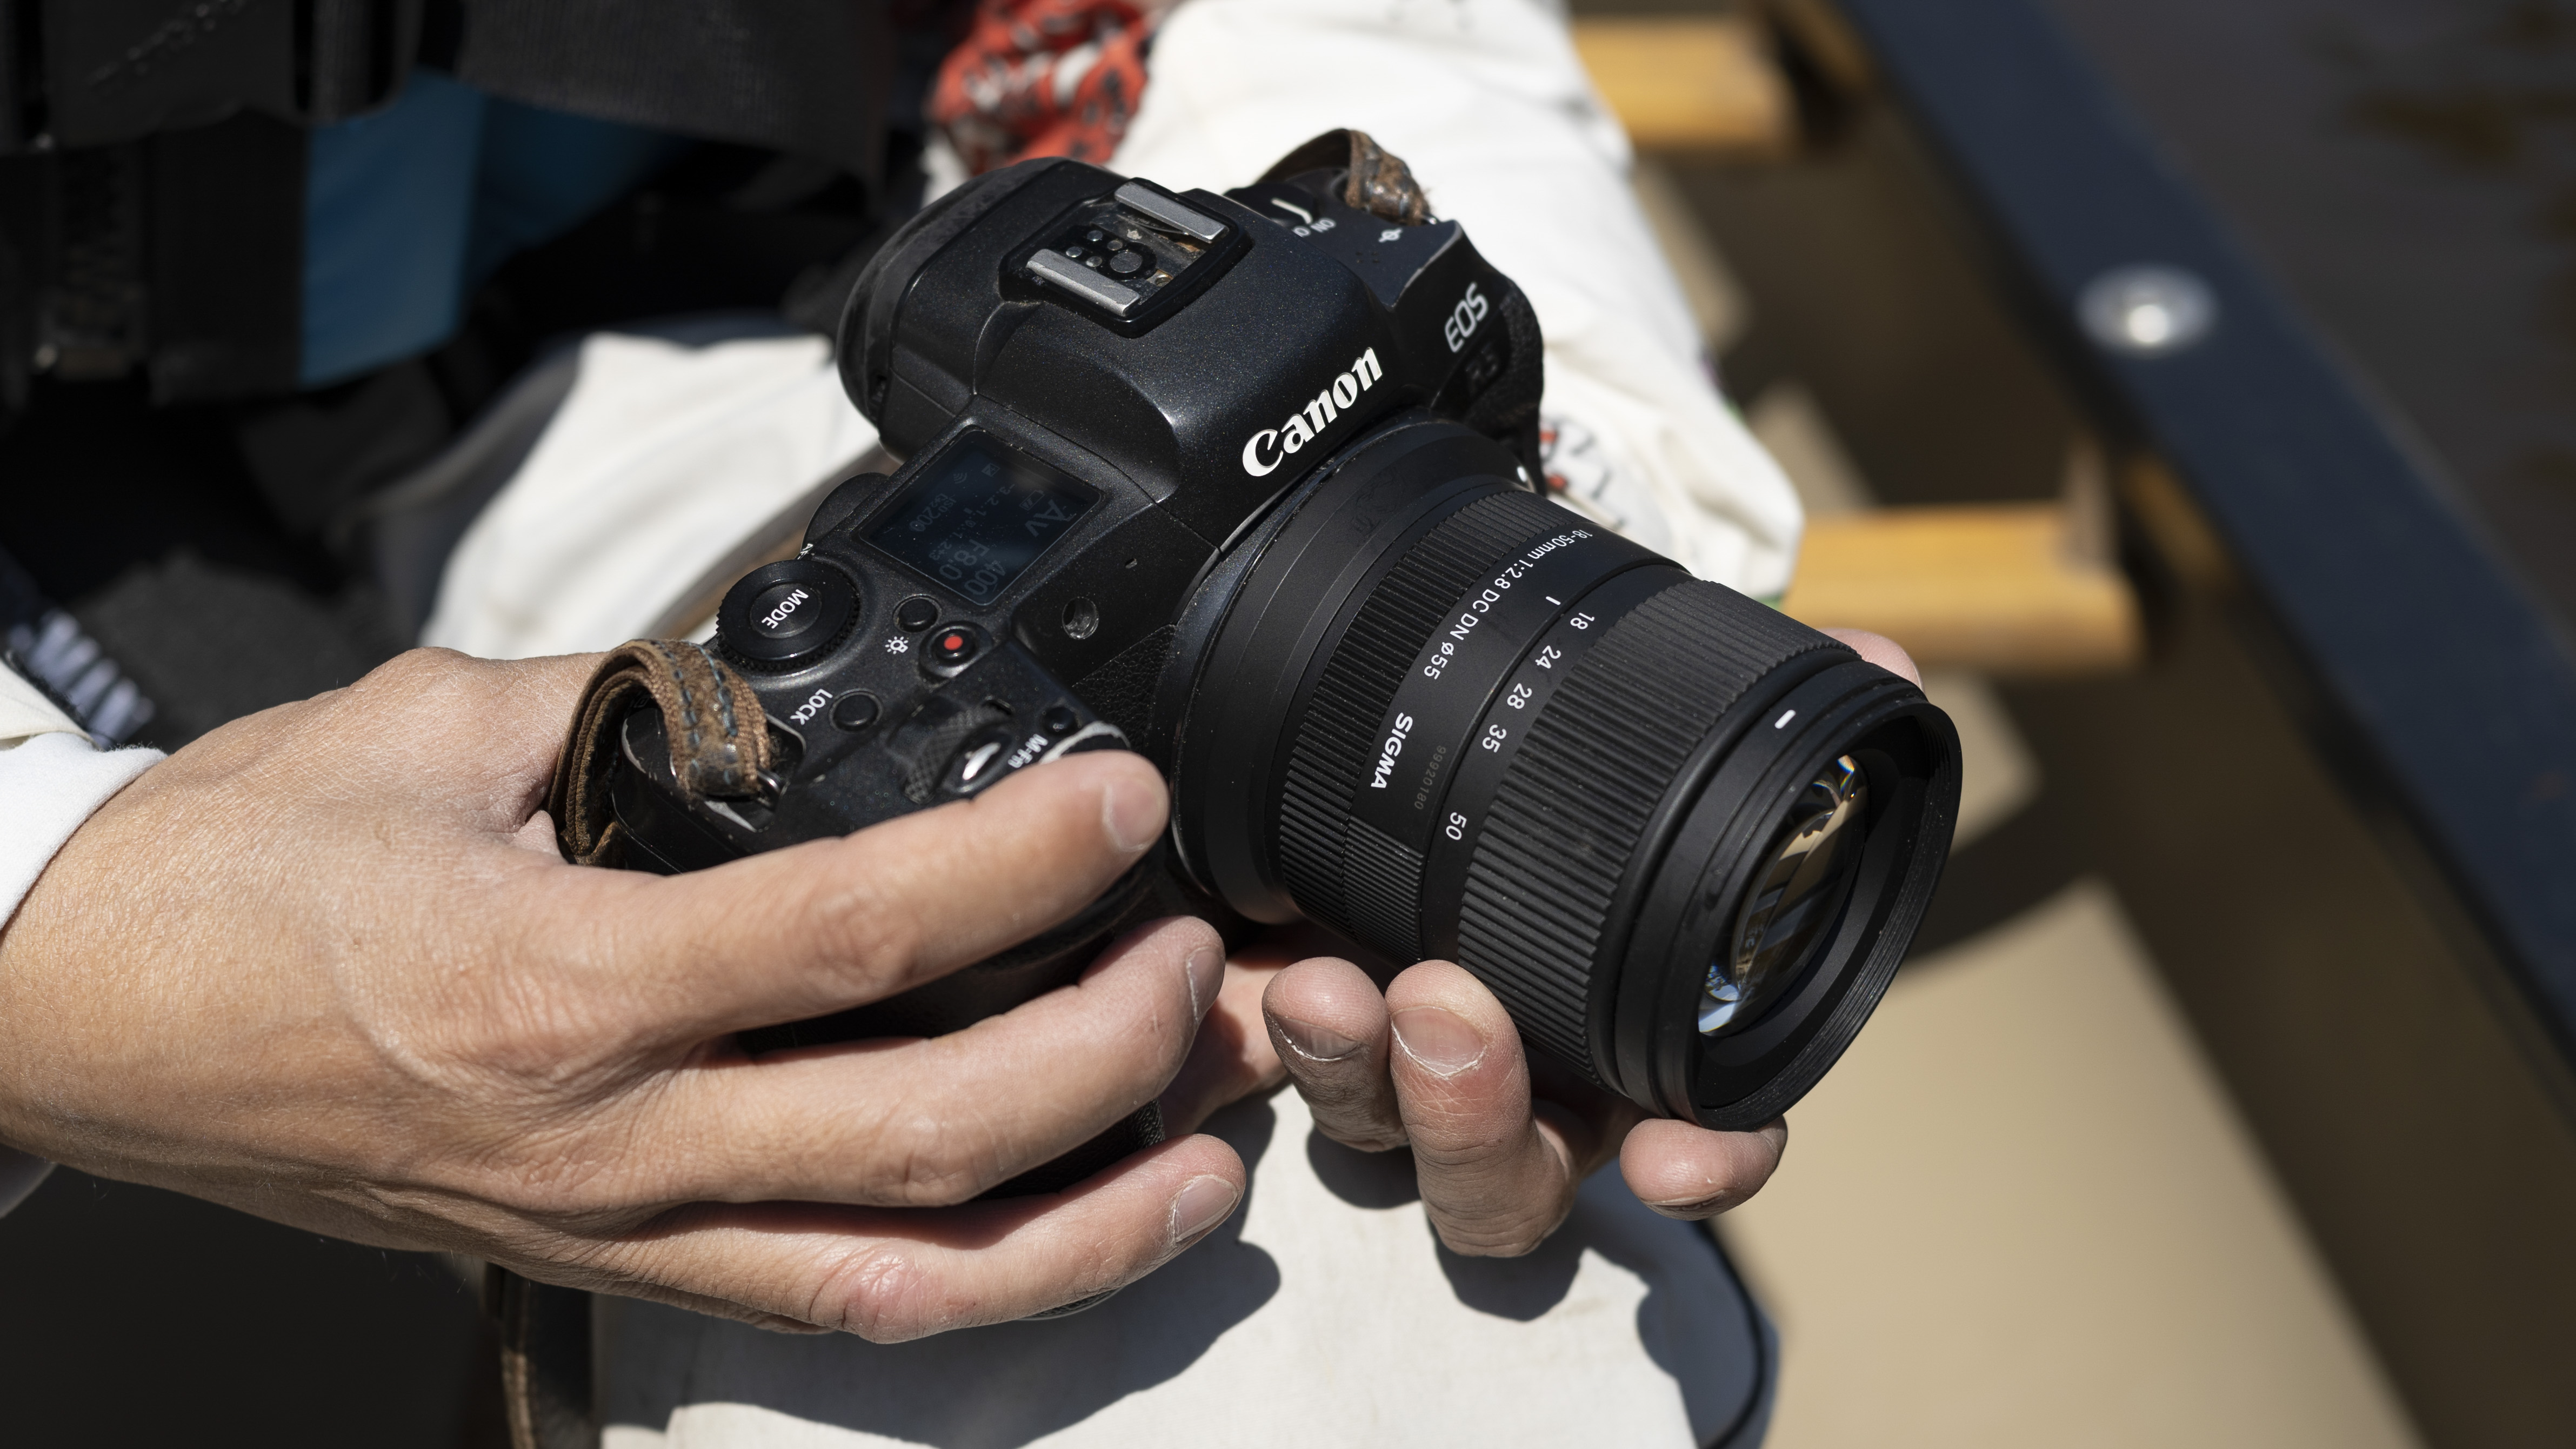 Sigma 18-50mm f/2.8 DC DN Contemporary lens in the hand, attached to a Canon EOS R5 camera